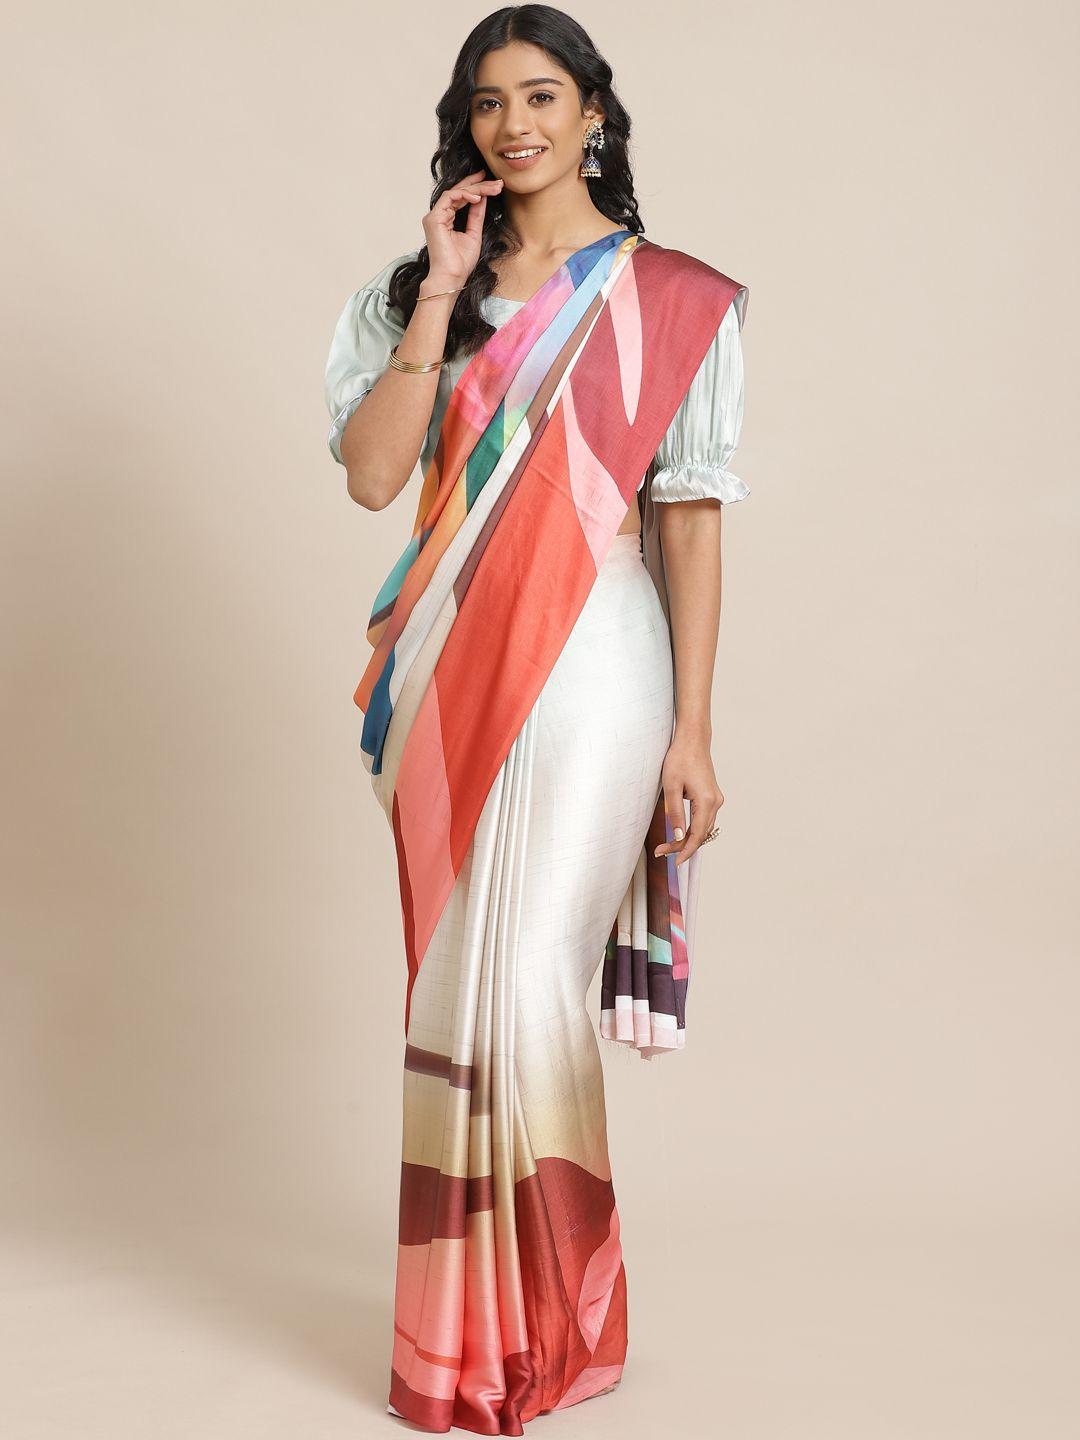 saree-mall-off-white-&-red-printed-saree-with-satin-finish